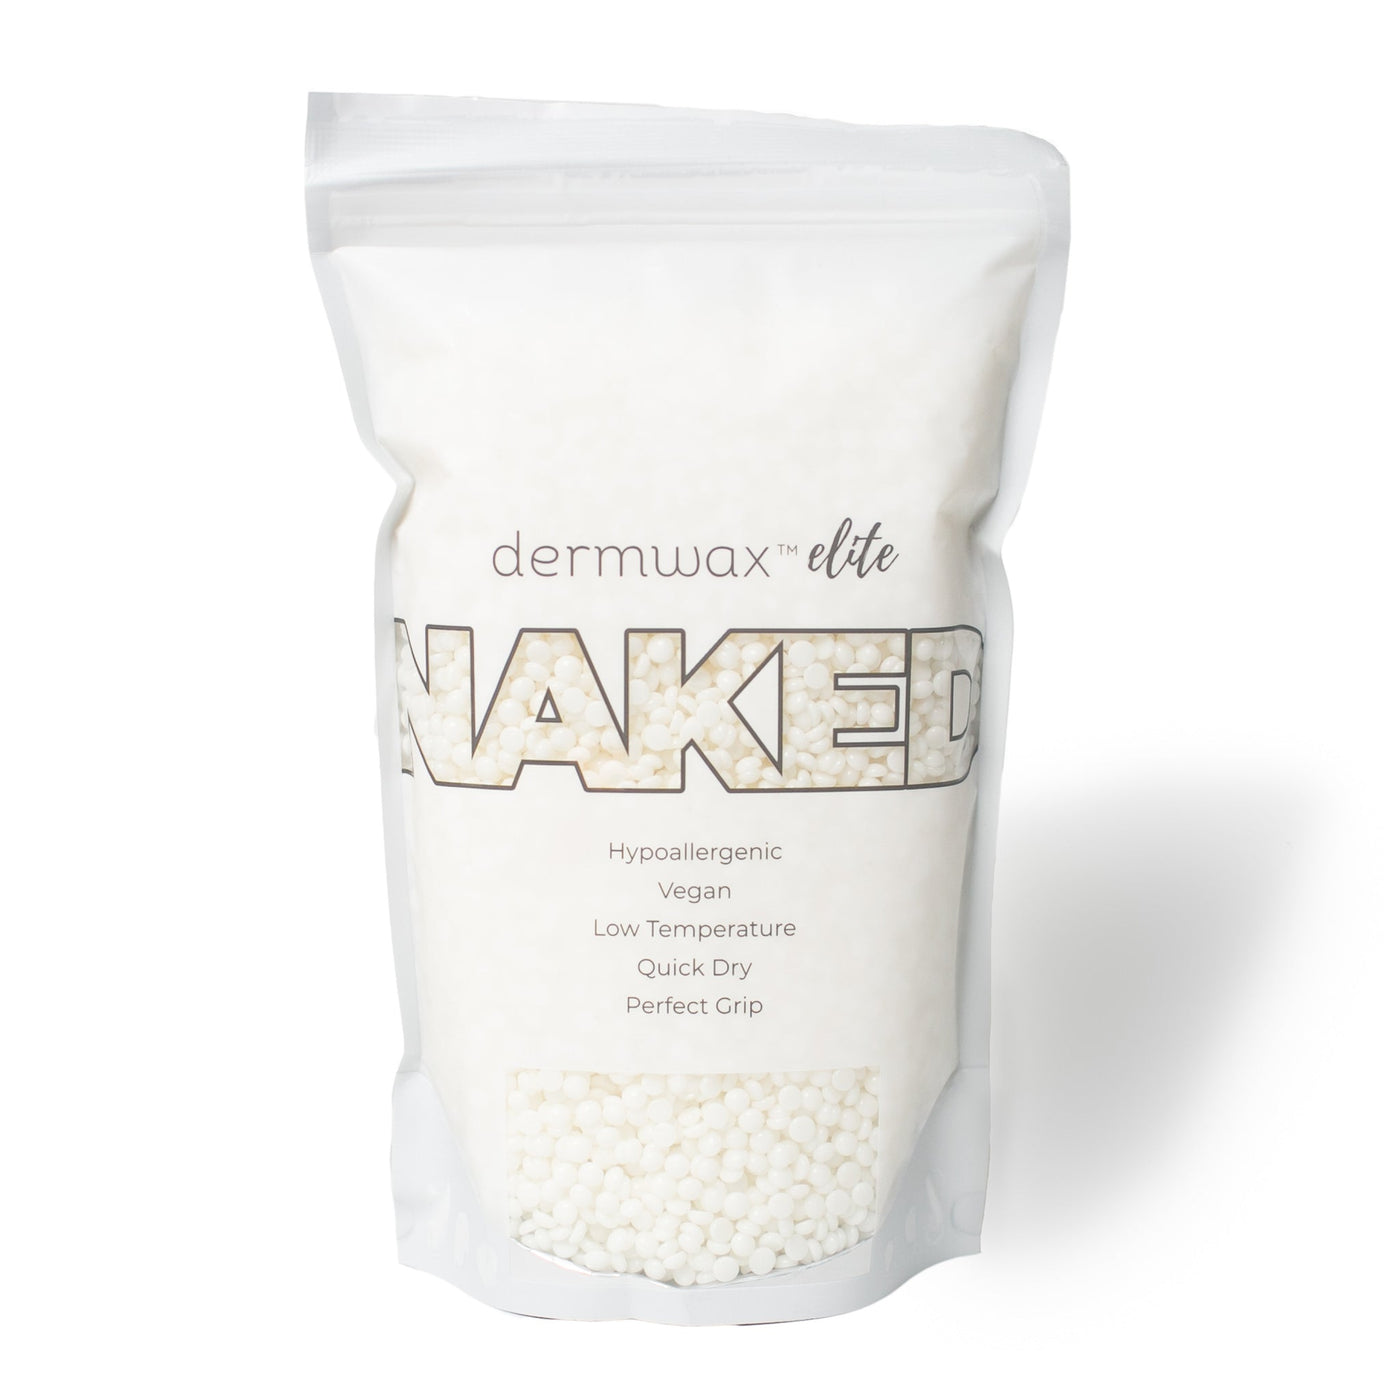 Dermwax Elite NAKED Shimmer Clear Hard Wax Beads